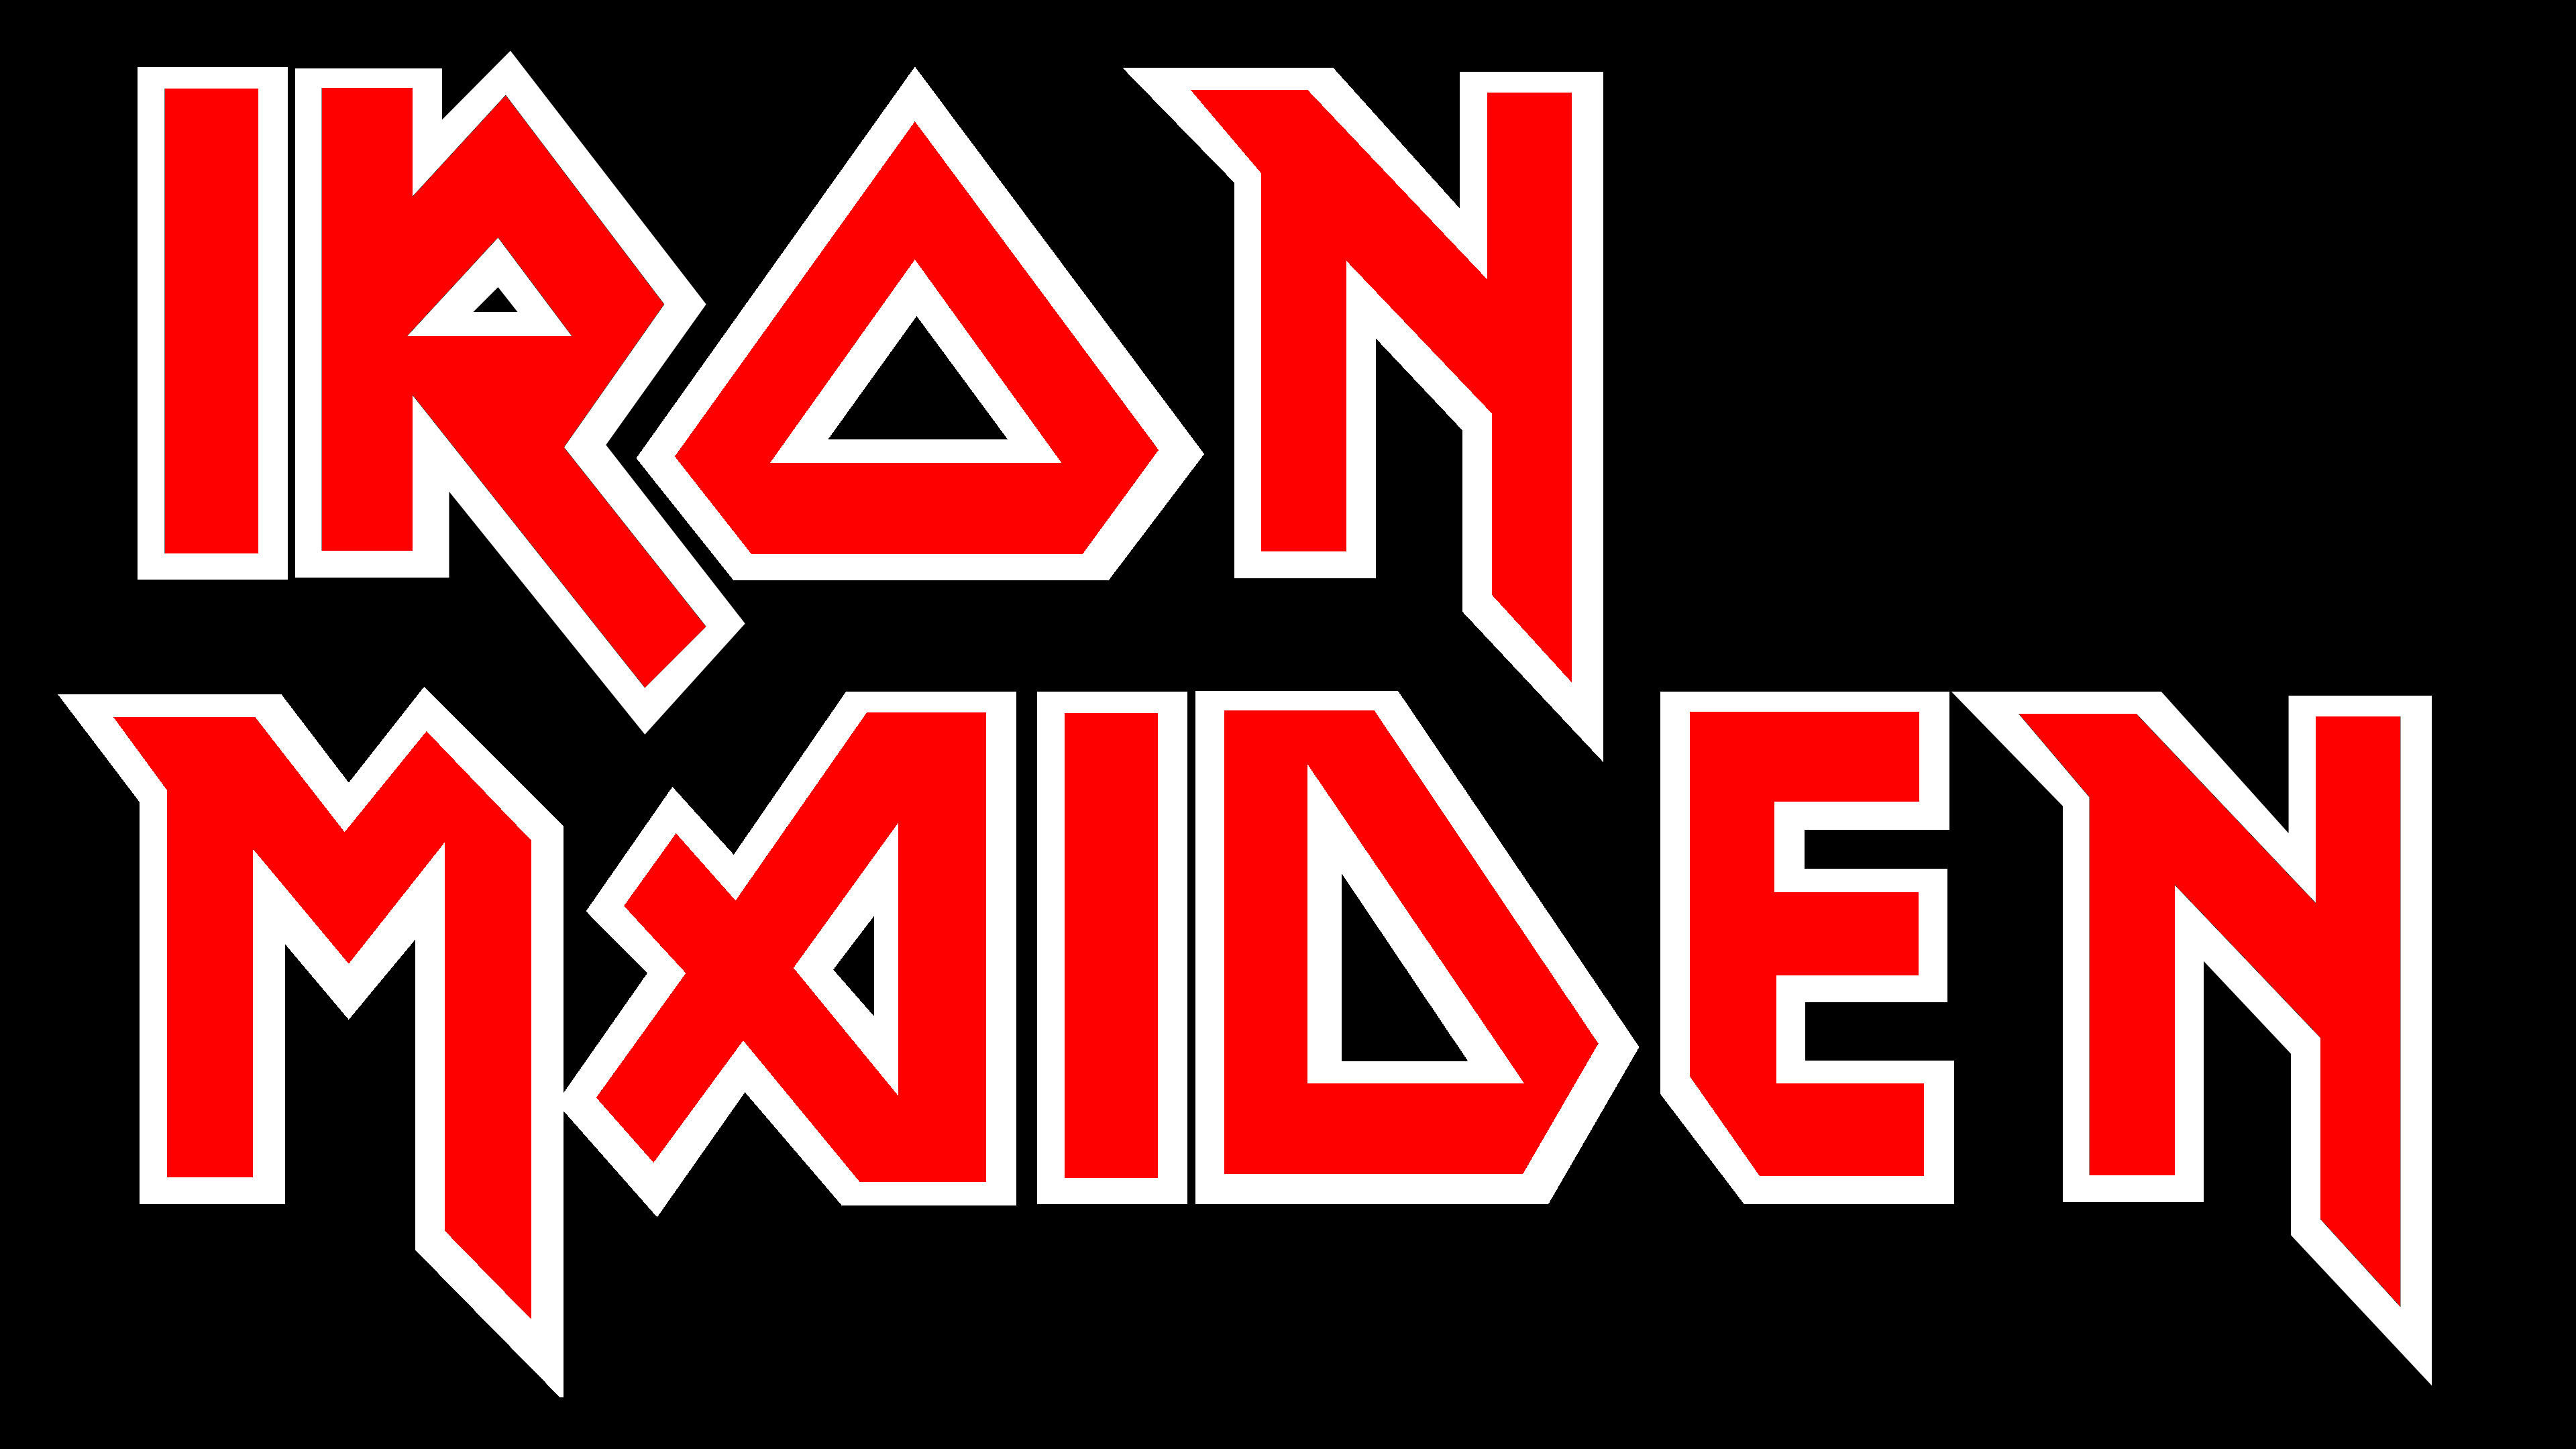 Iron Maiden (Band) Wallpapers (44 images) - WallpaperCosmos